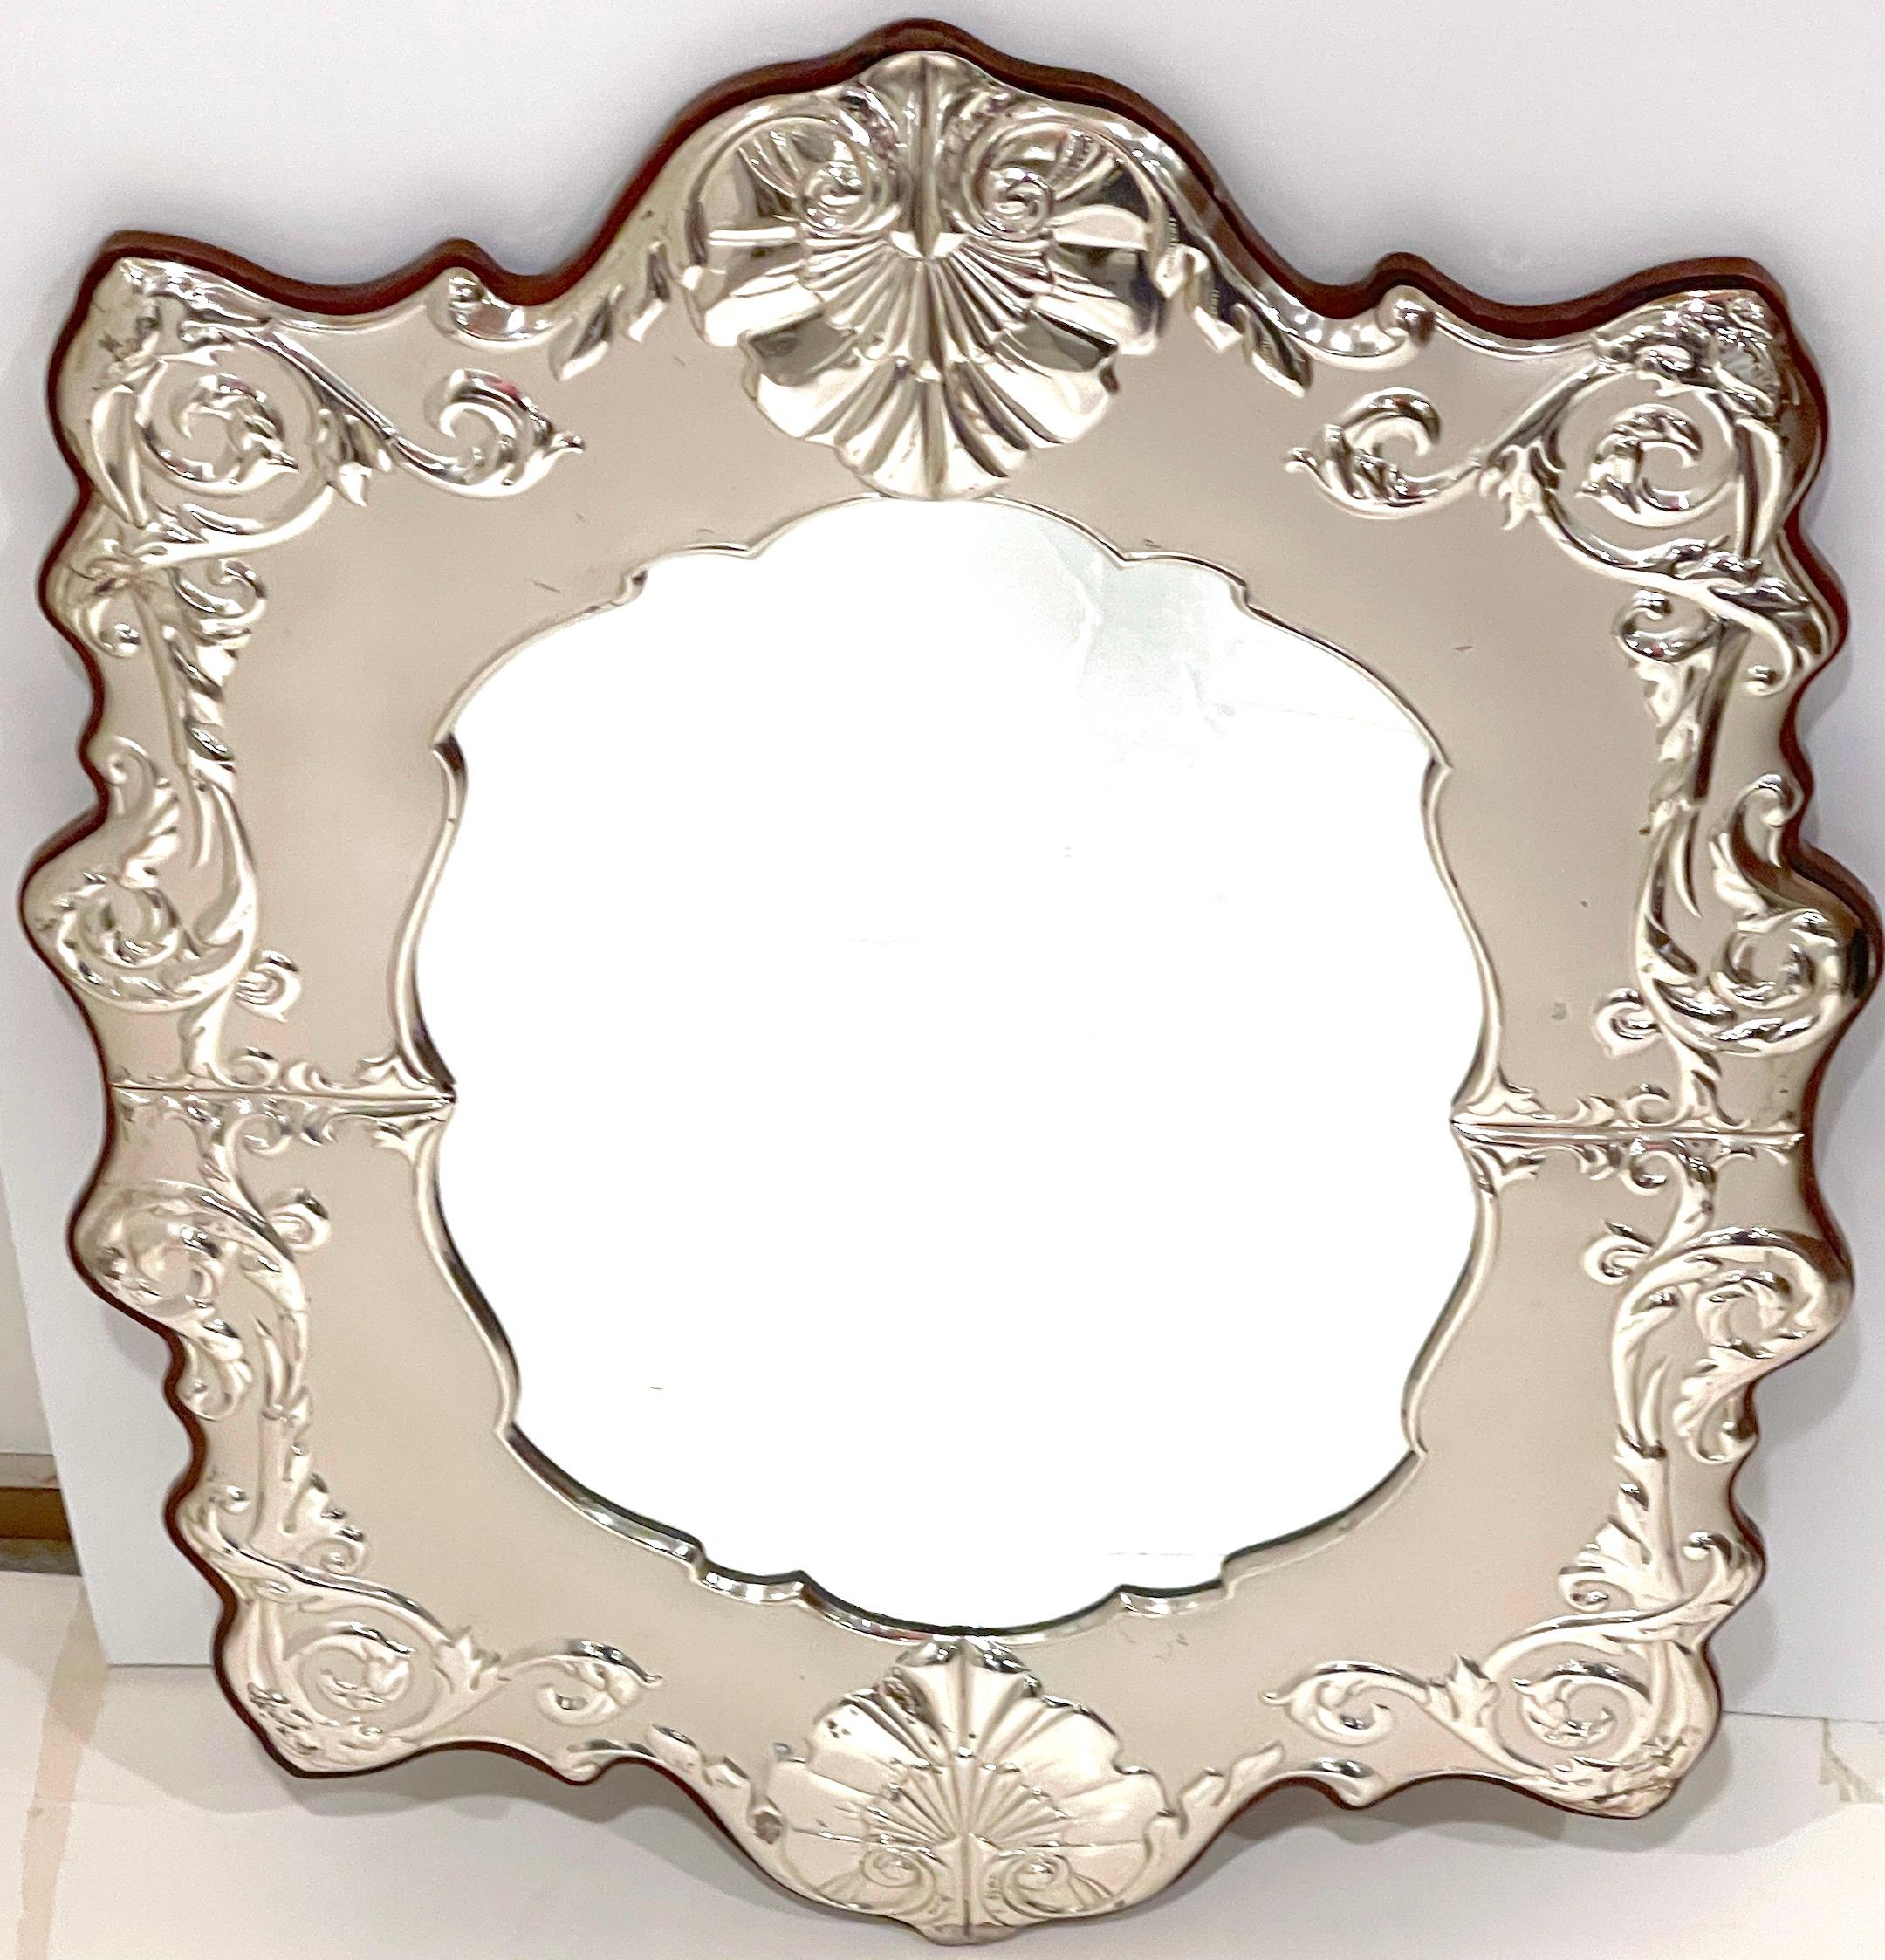 Italian Sterling Silver Neoclassical Style Wall Mirror
Italy, circa Later 20th Century 
Hallmarked numerous times .925 in oval 

A stunning Italian Sterling Silver Neoclassical Style Wall Mirror from Italy, dating from the later 20th century. This